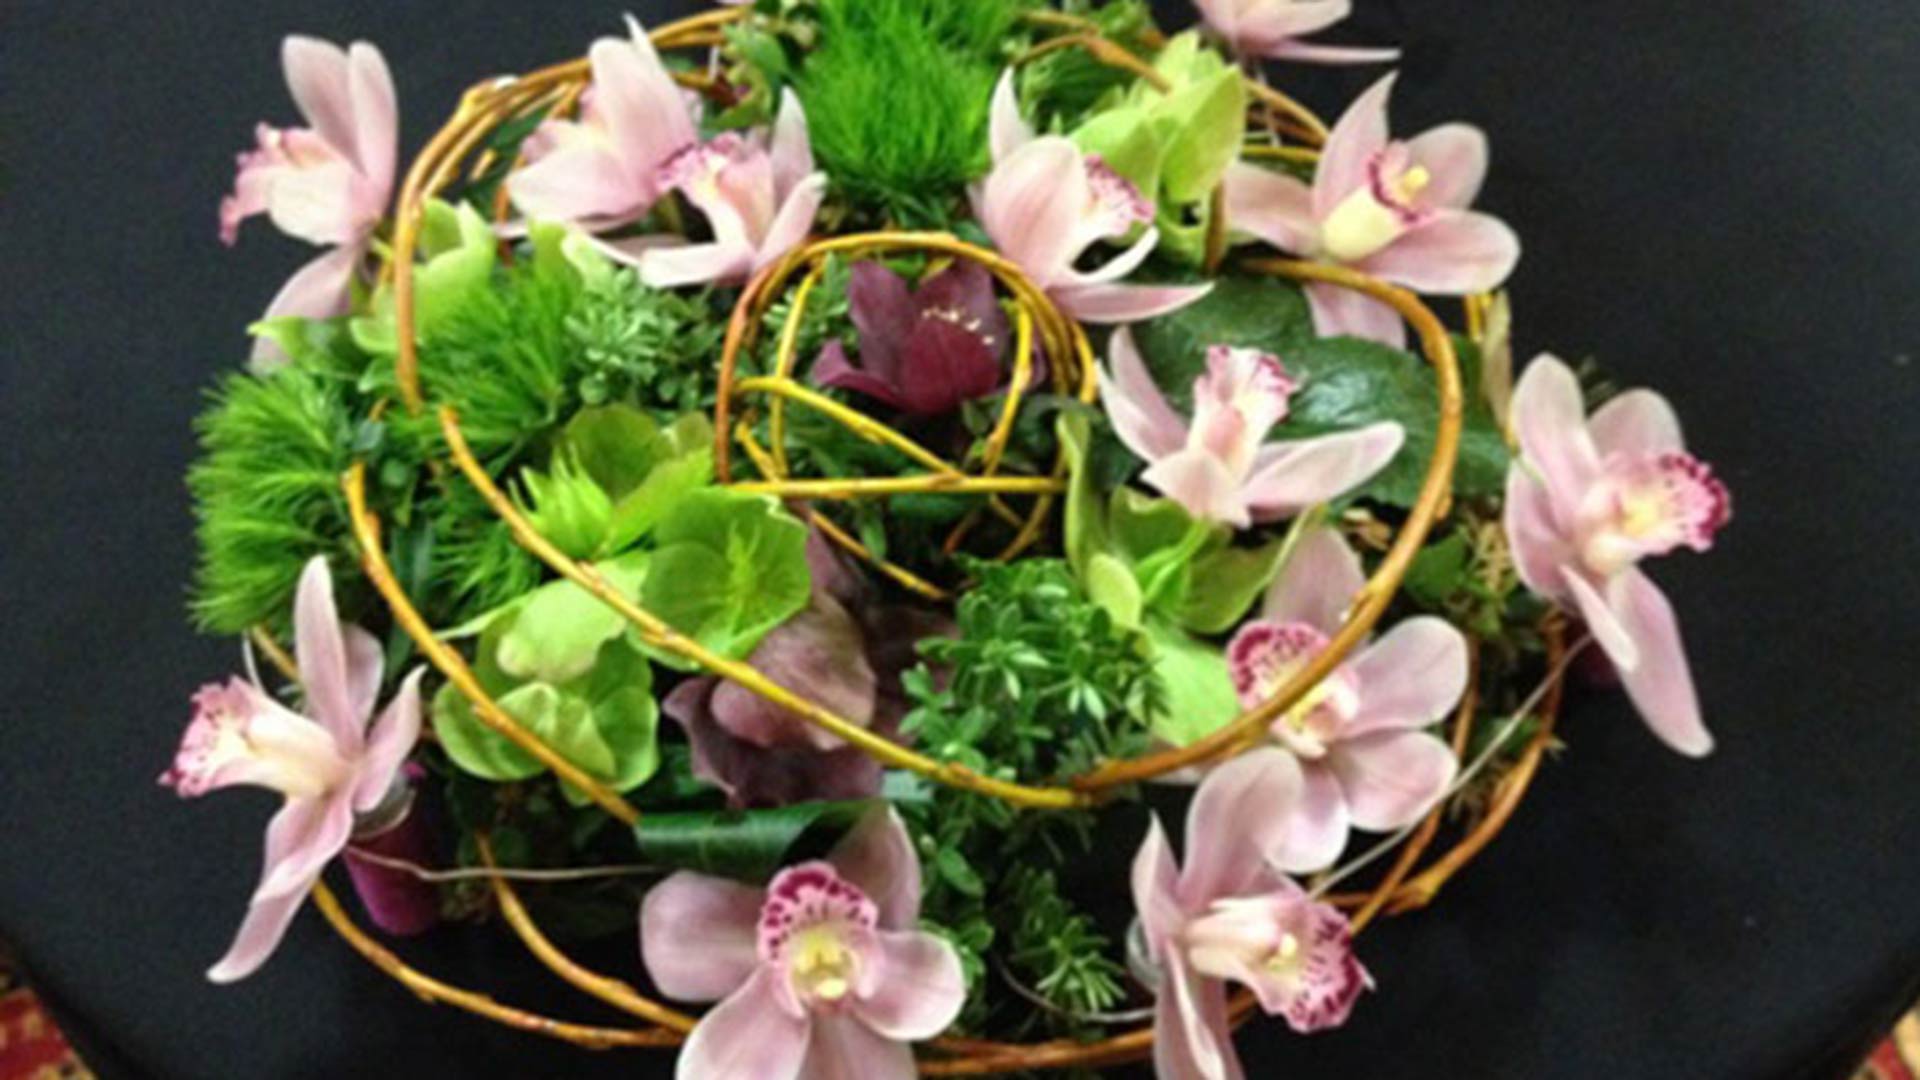 Table Centre for Spring Using a Posy Pad - Provided by Diane Fair